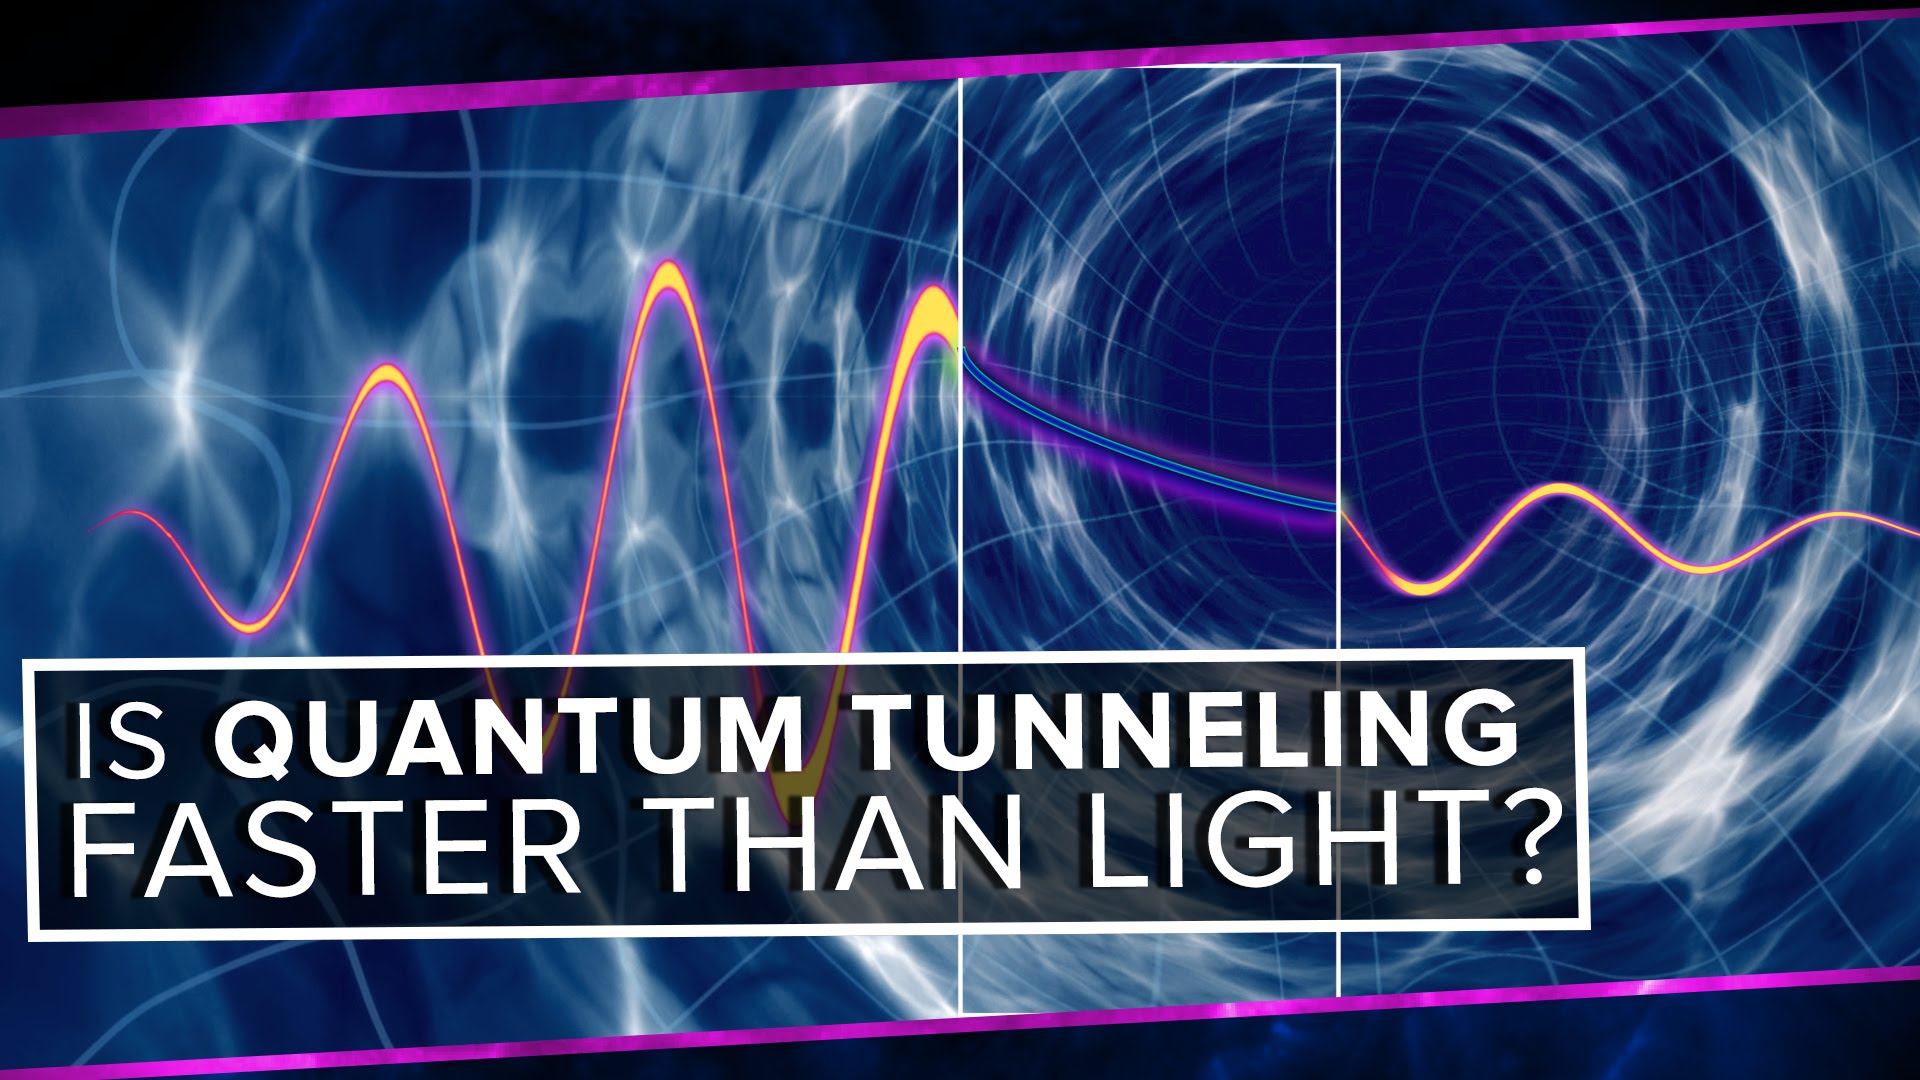 Is Quantum Tunneling Faster than Light?